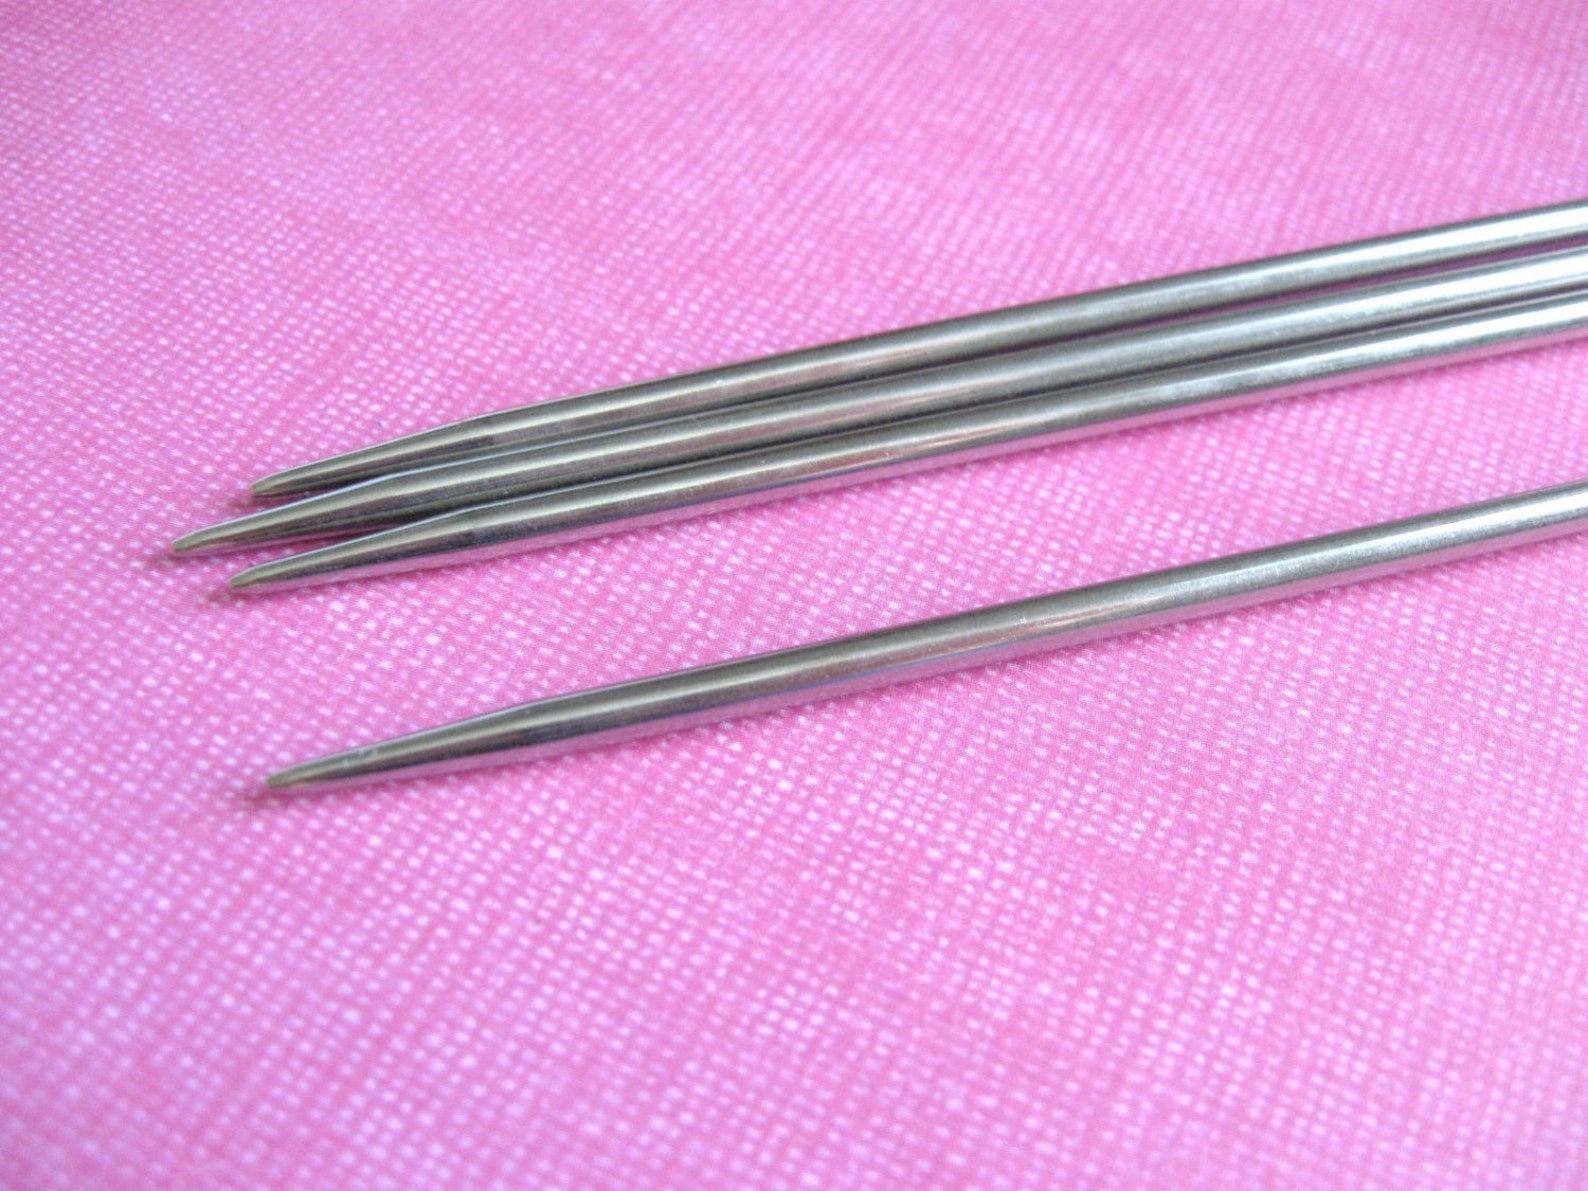 Stainless Steel Double Pointed Knitting Needles 2.75mm 3mm or | Etsy Canada